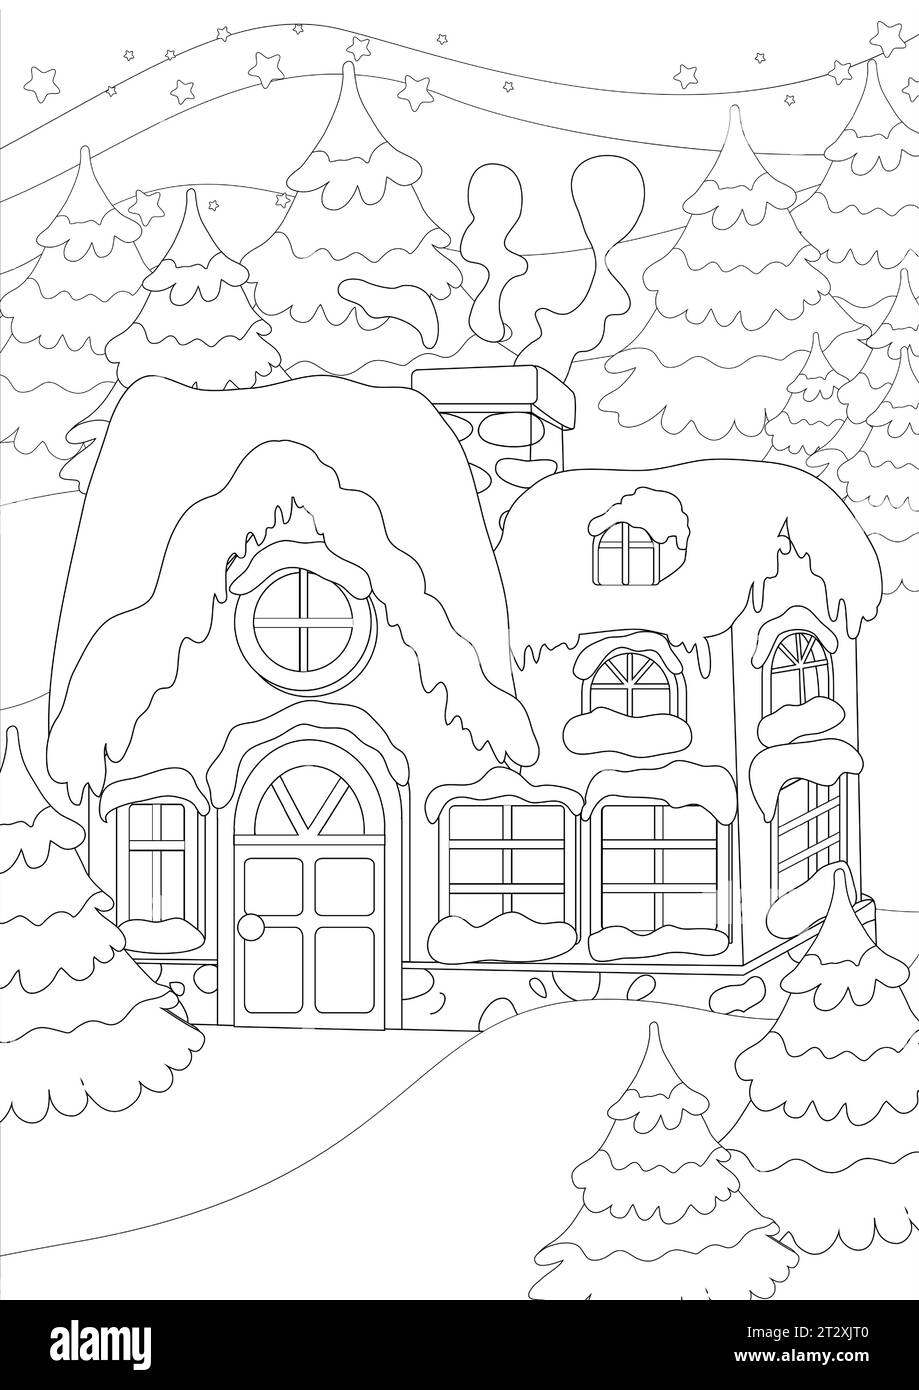 Coloring Pages. Night or evening on the eve of Christmas and a cozy house among fir trees. Christmas trees and the roof are covered with snow. Stock Vector